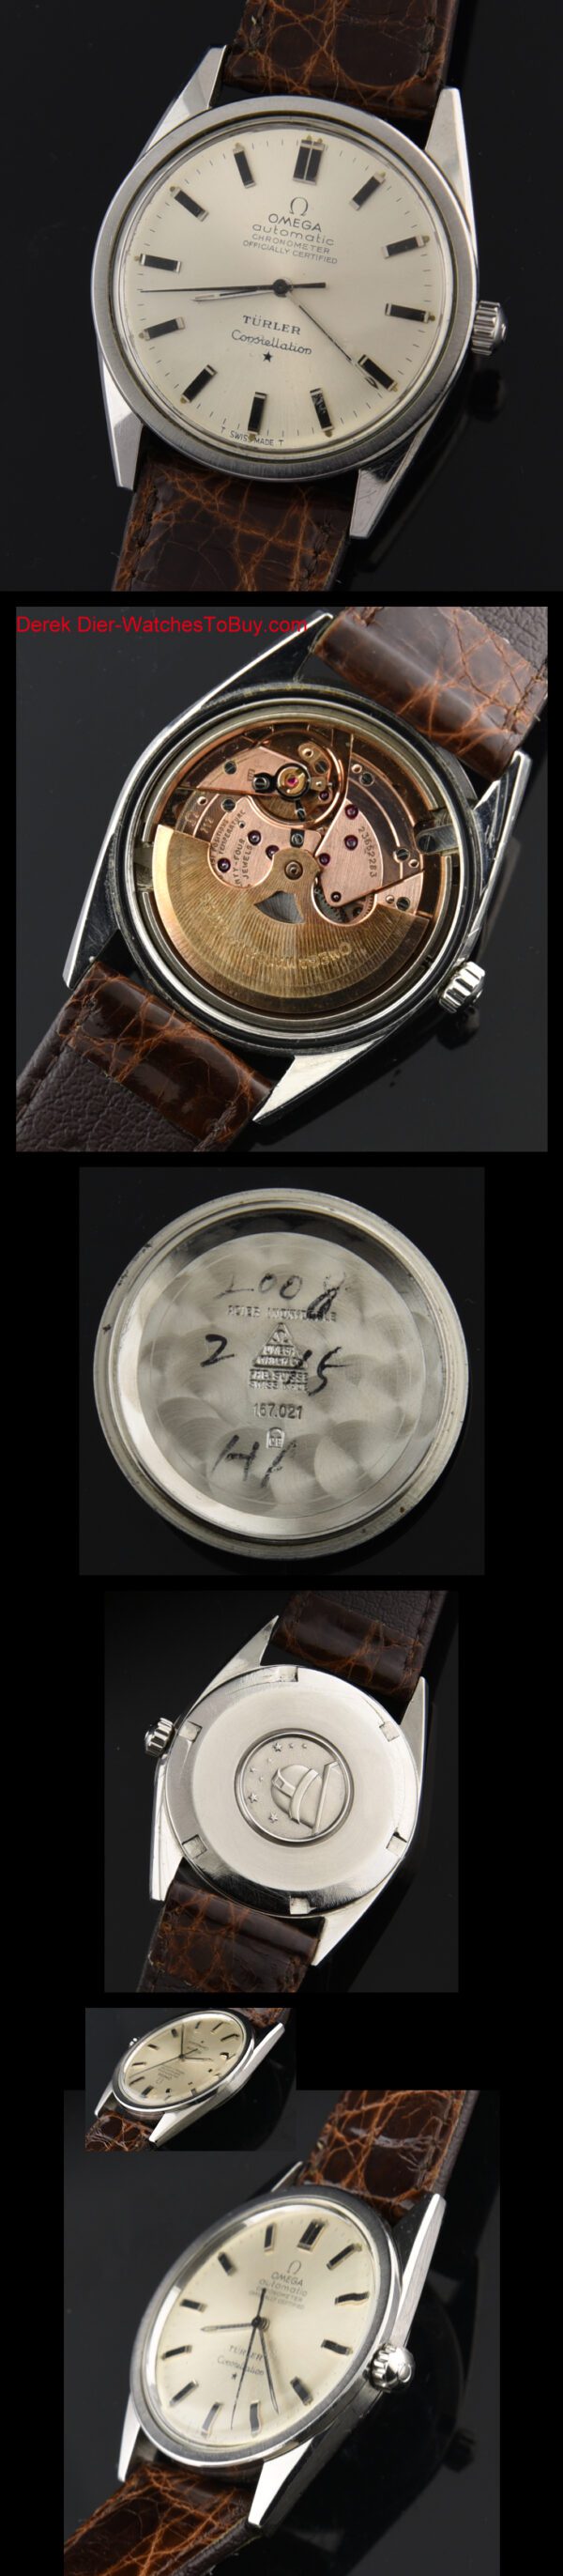 1966 Omega 33.5mm Constellation stainless steel watch with original Turler dial, winding crown, and caliber 712 chronometer-grade movement.